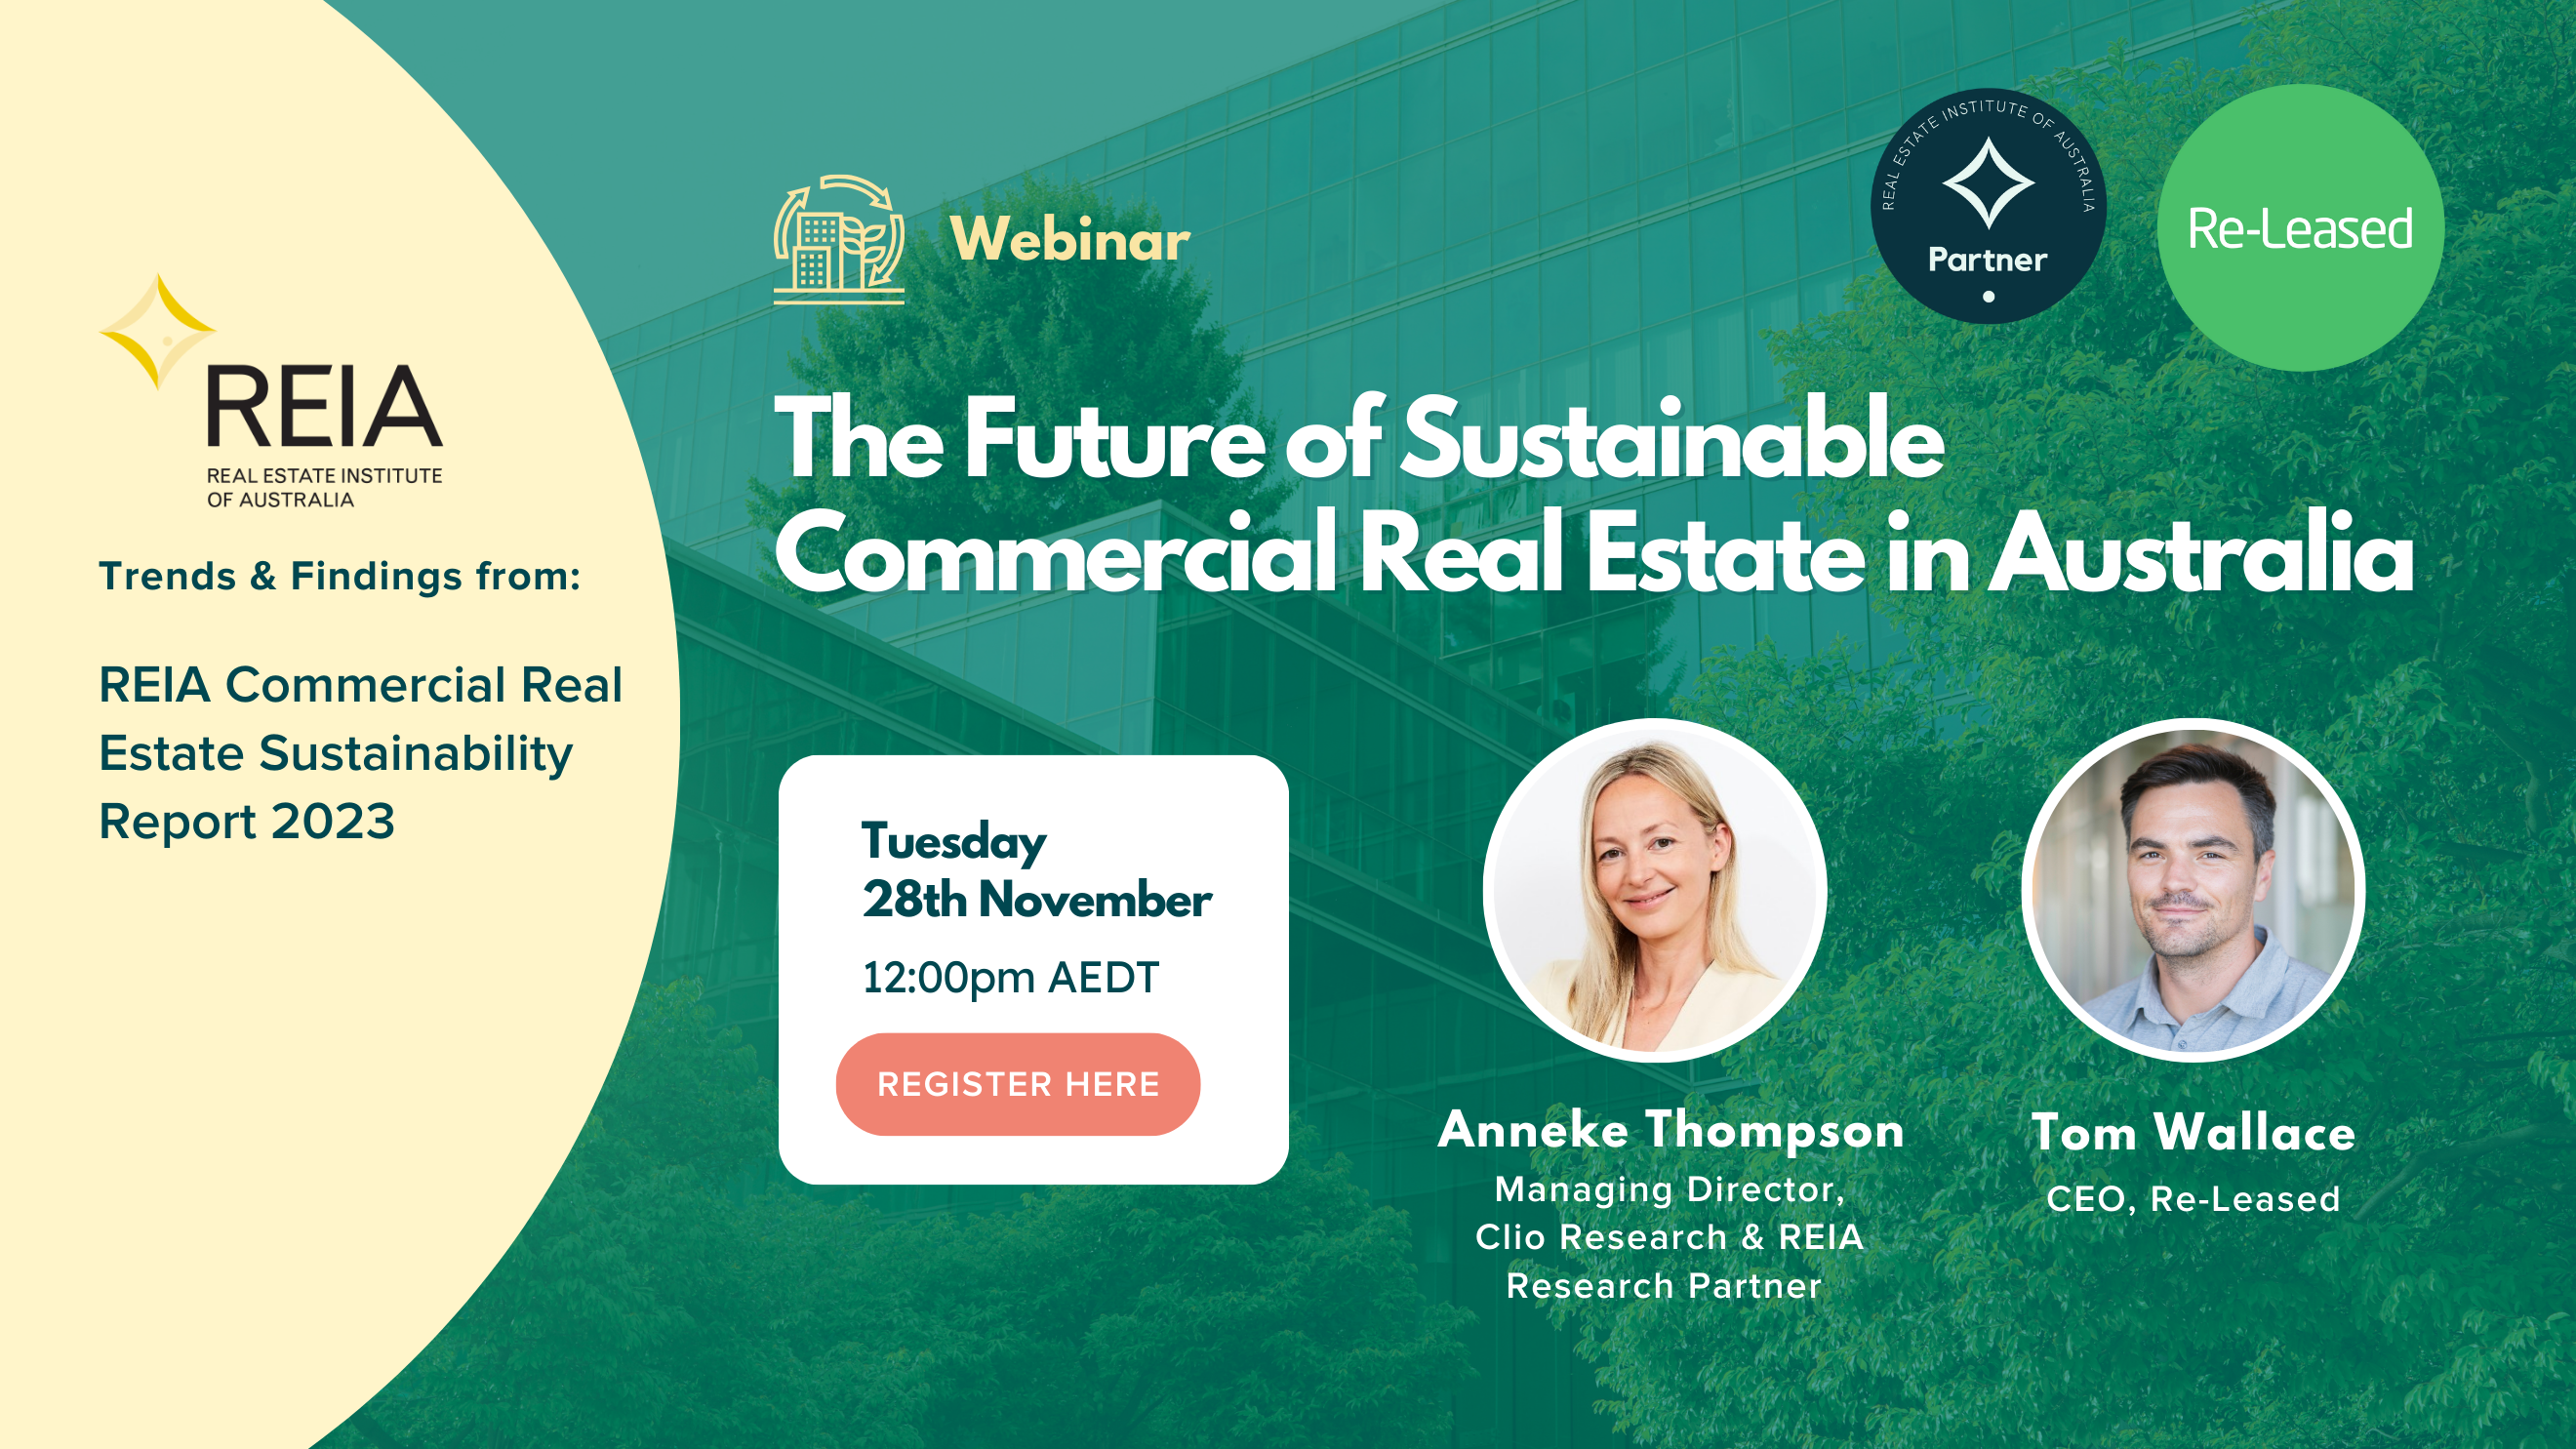 The Future of Sustainable Commercial Real Estate in Australia